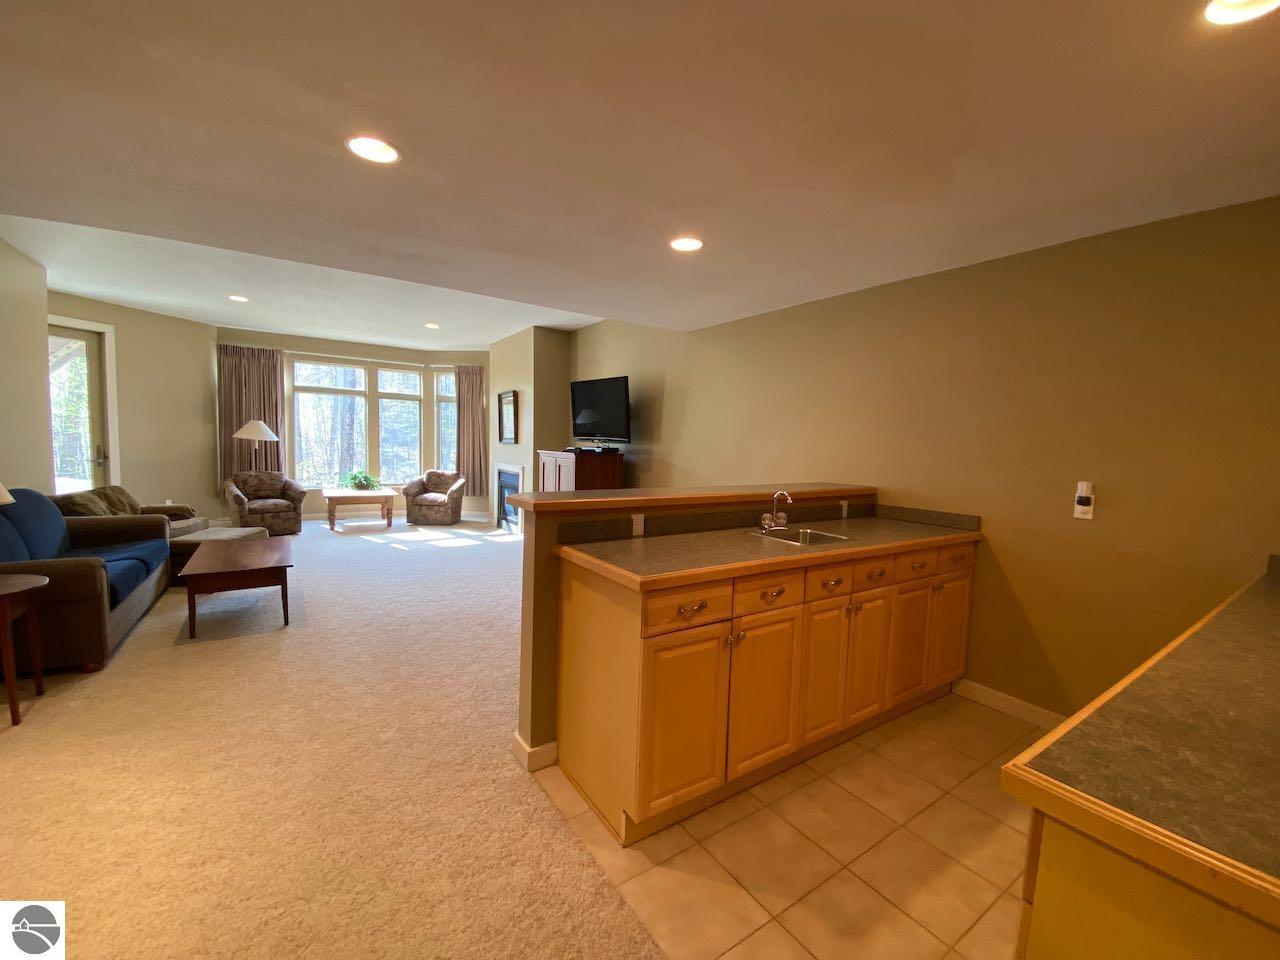 2280 Troon South, Bellaire, MI 49615 photo 37 of 58